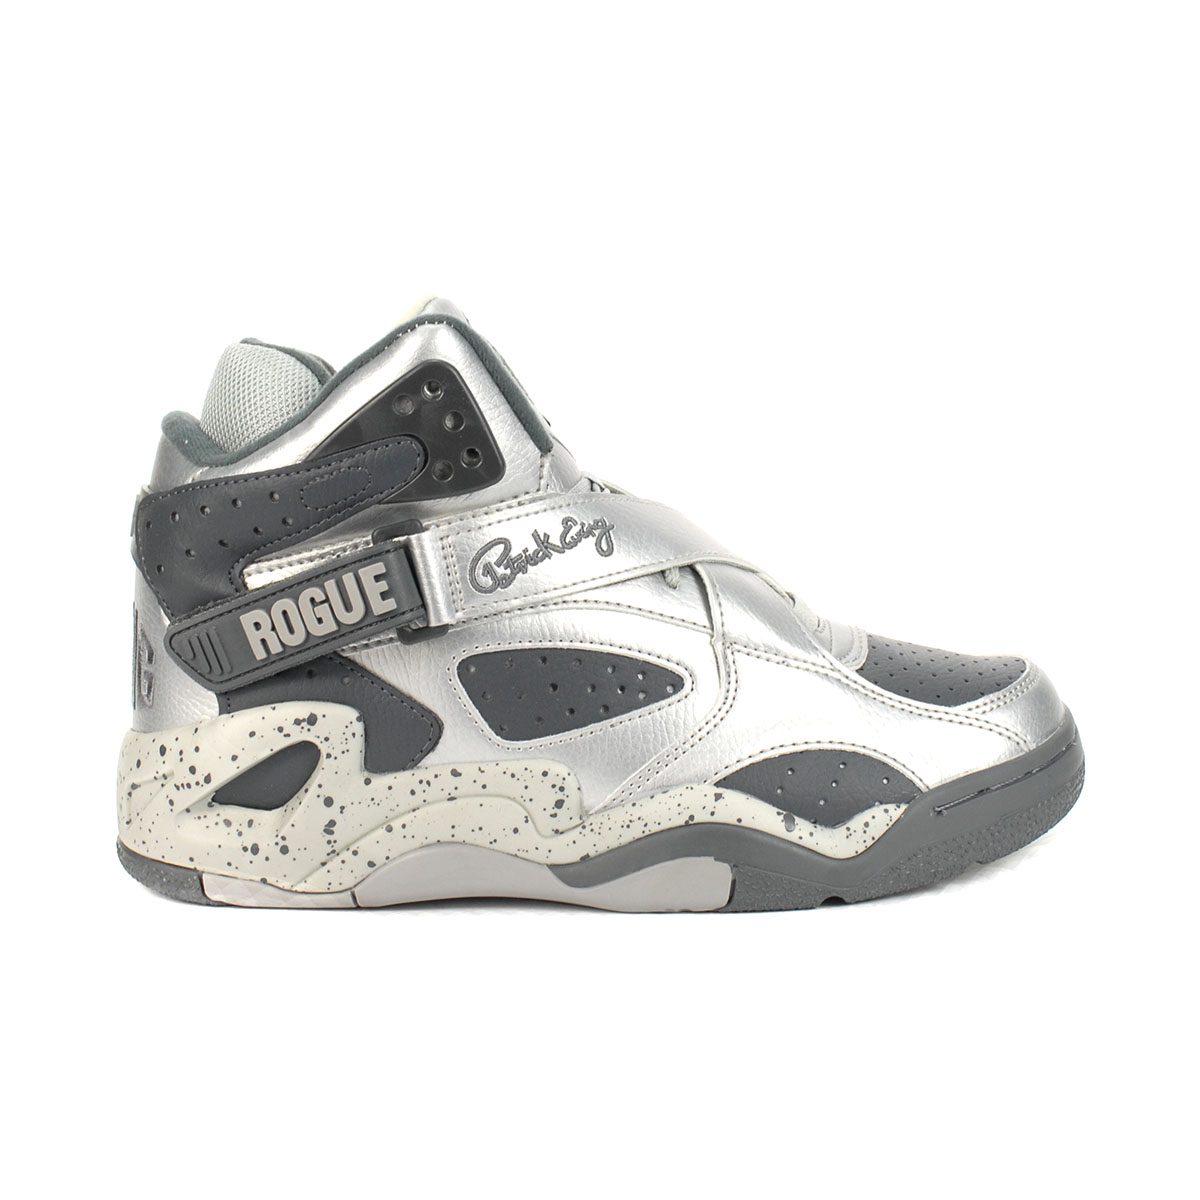  PATRICK EWING ATHLETICS ROGUE Silver/Castlerock : Clothing,  Shoes & Jewelry